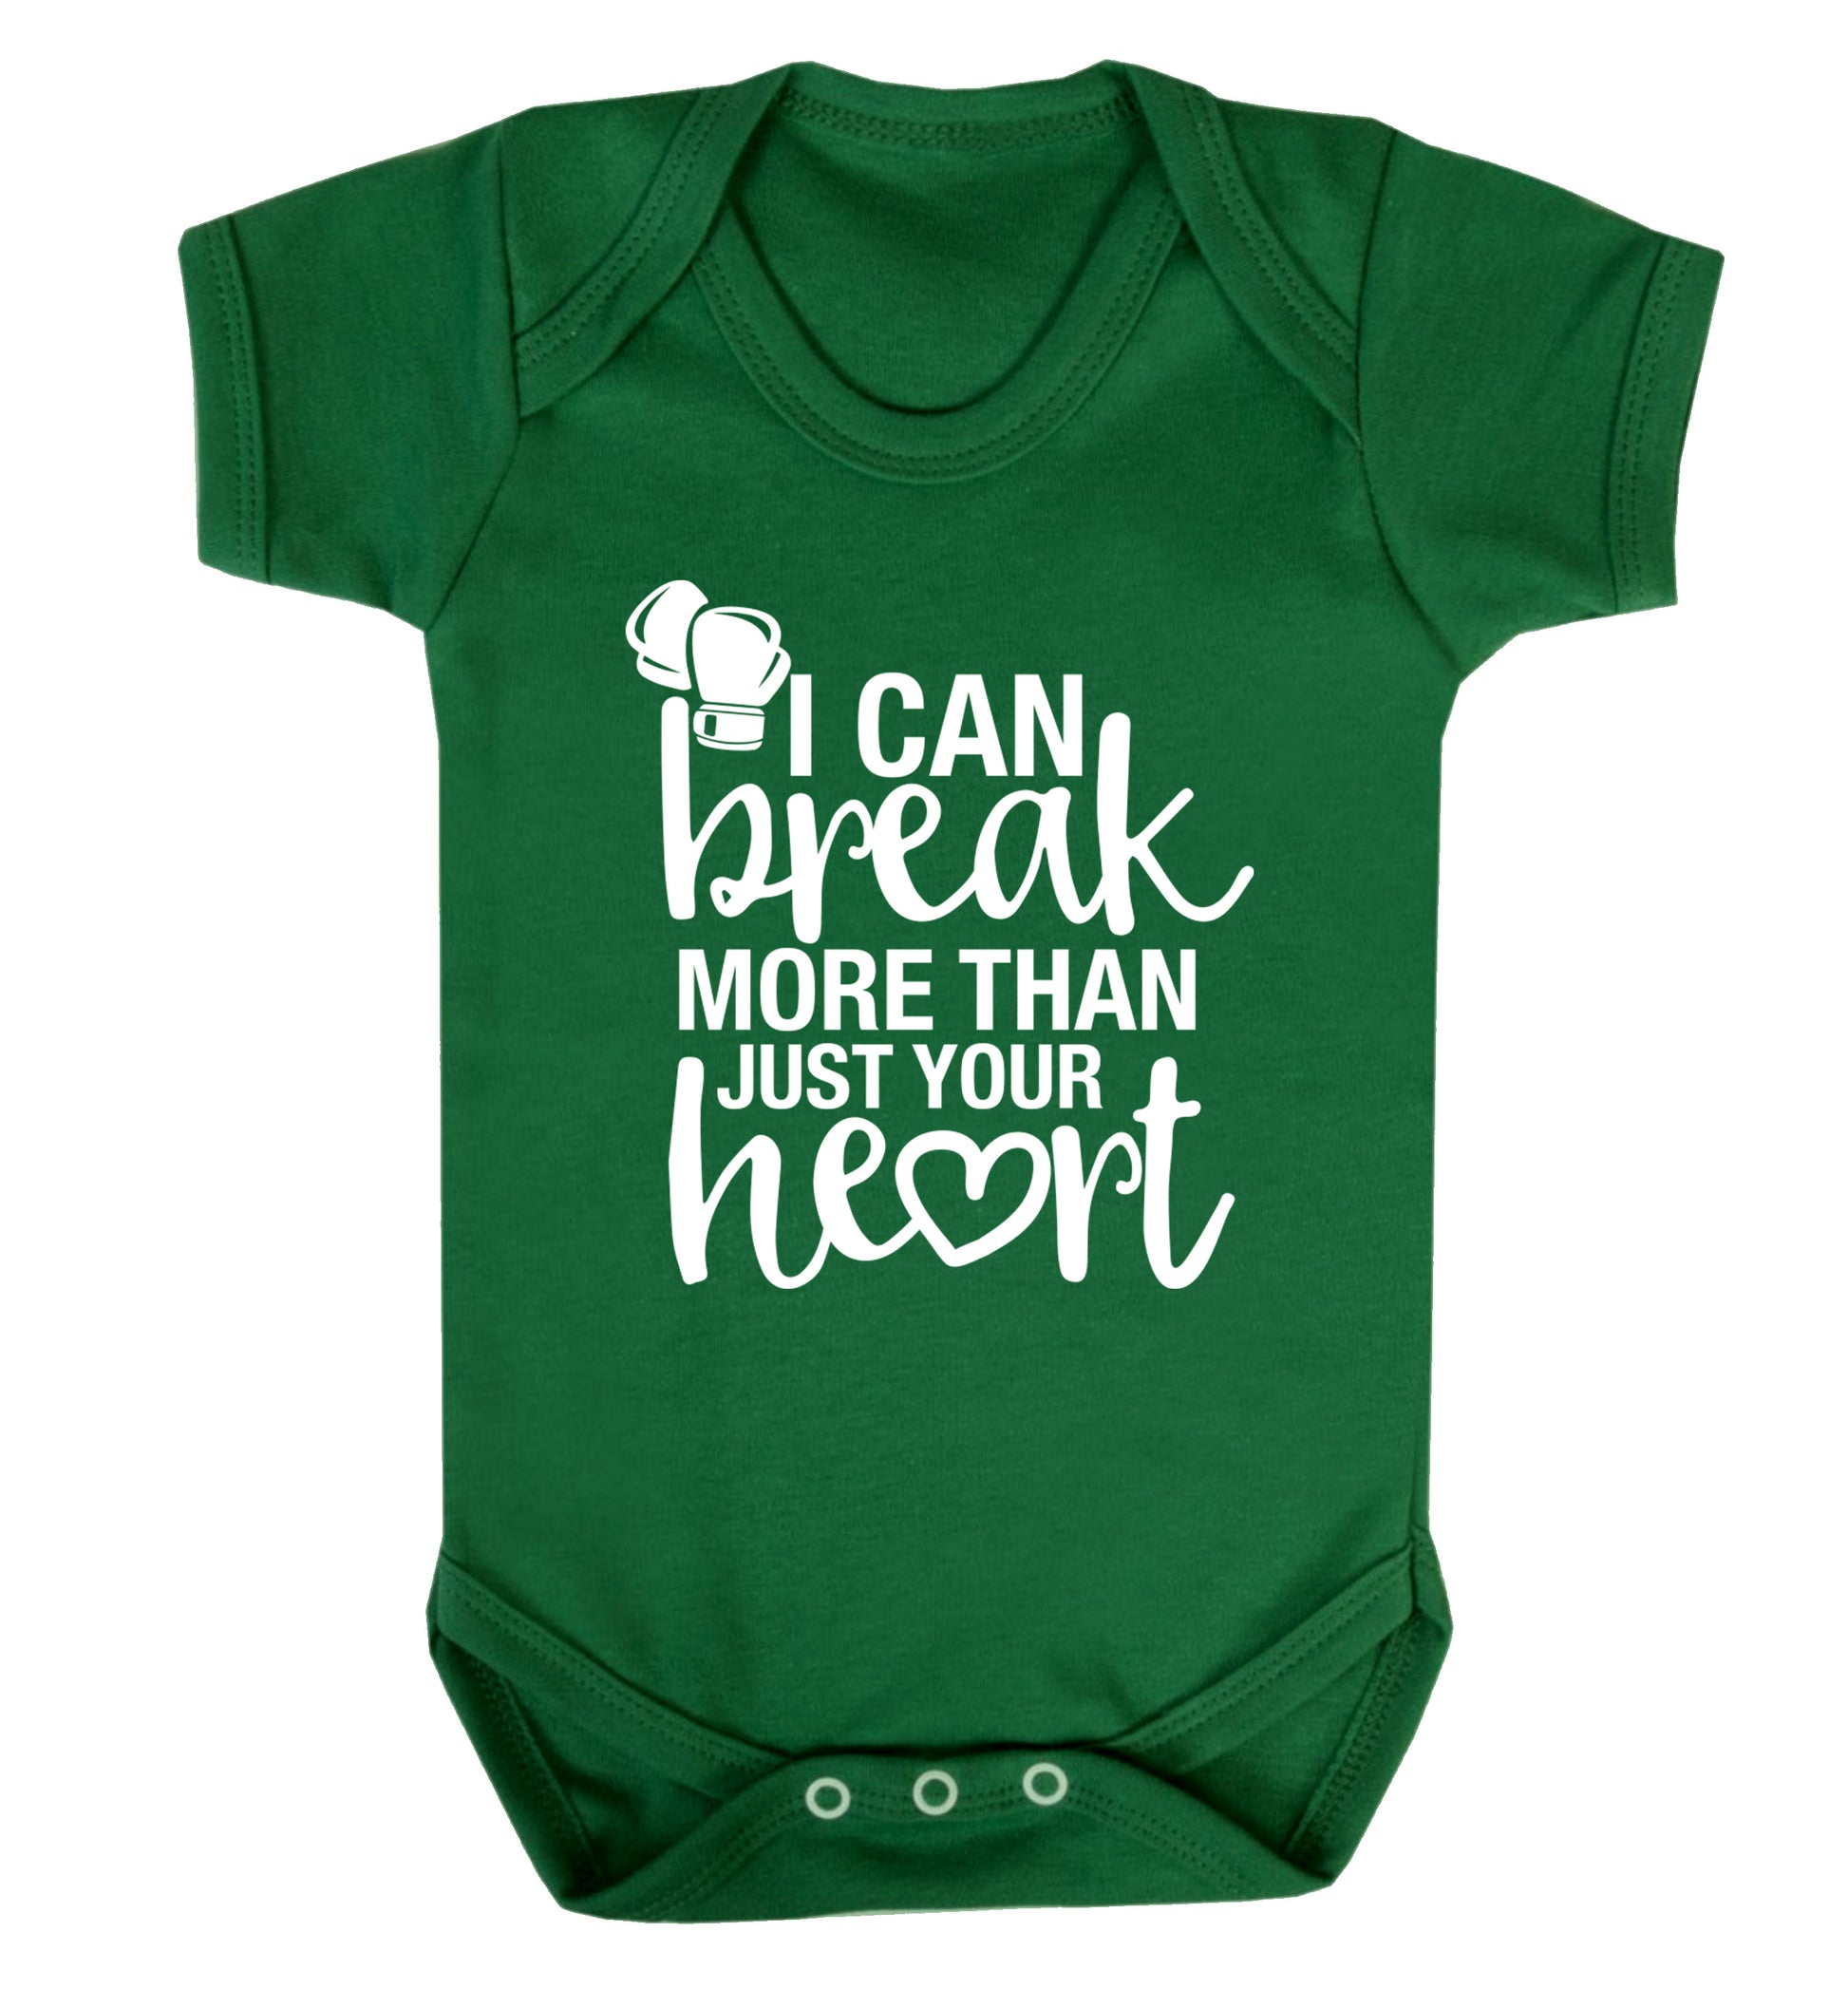 I can break more than just your heart Baby Vest green 18-24 months